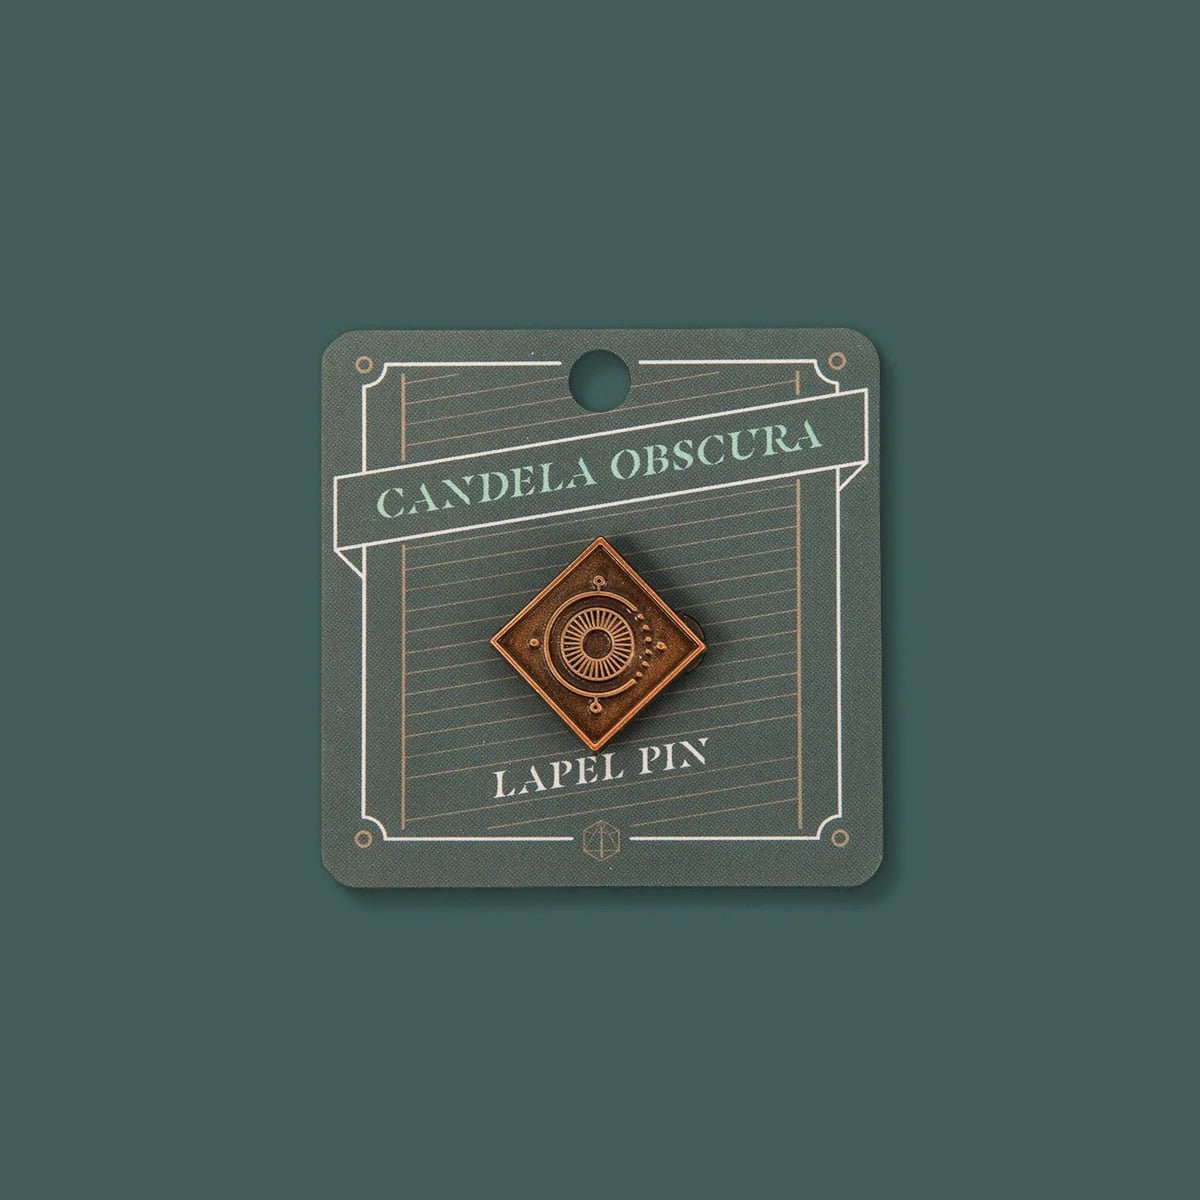 Candela Obscura Lapel Pin - The Fourth Place